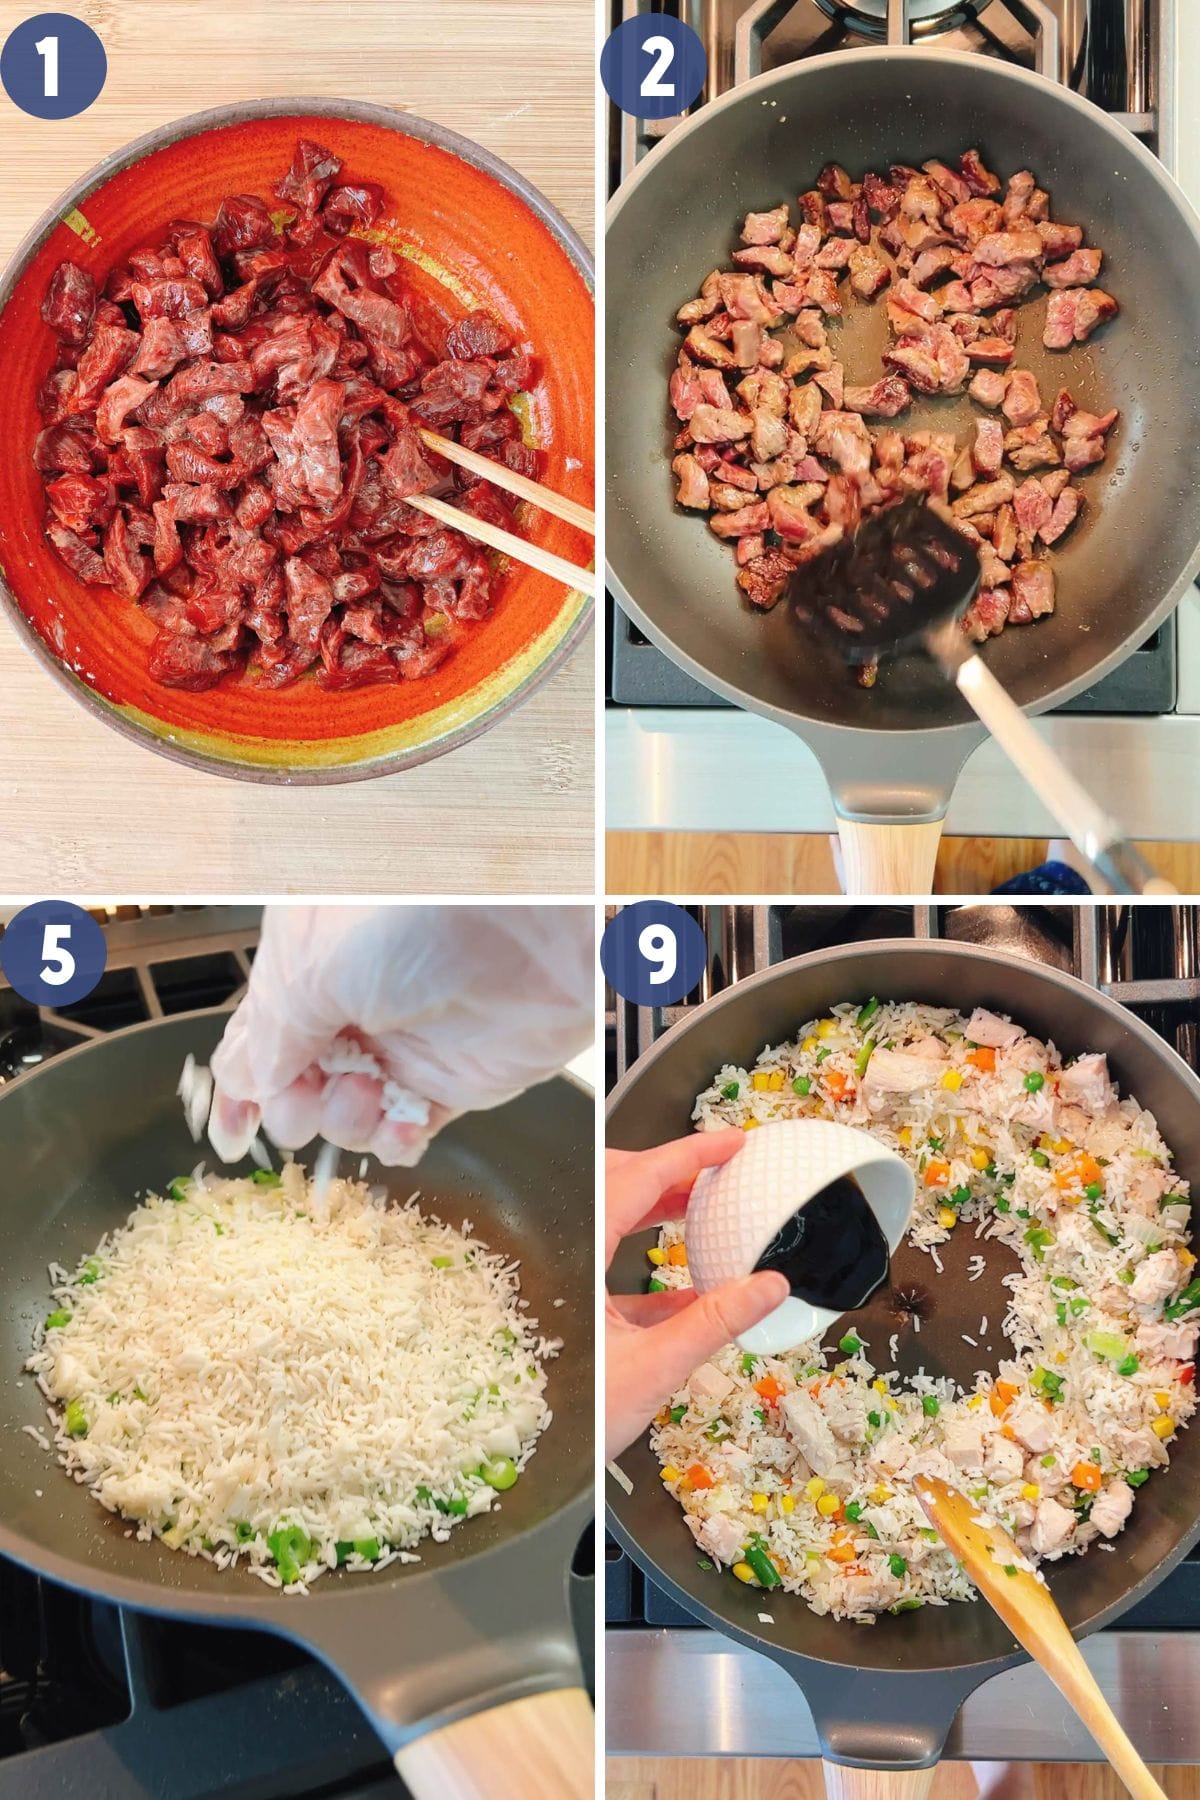 Person demos how to make steak fried rice.